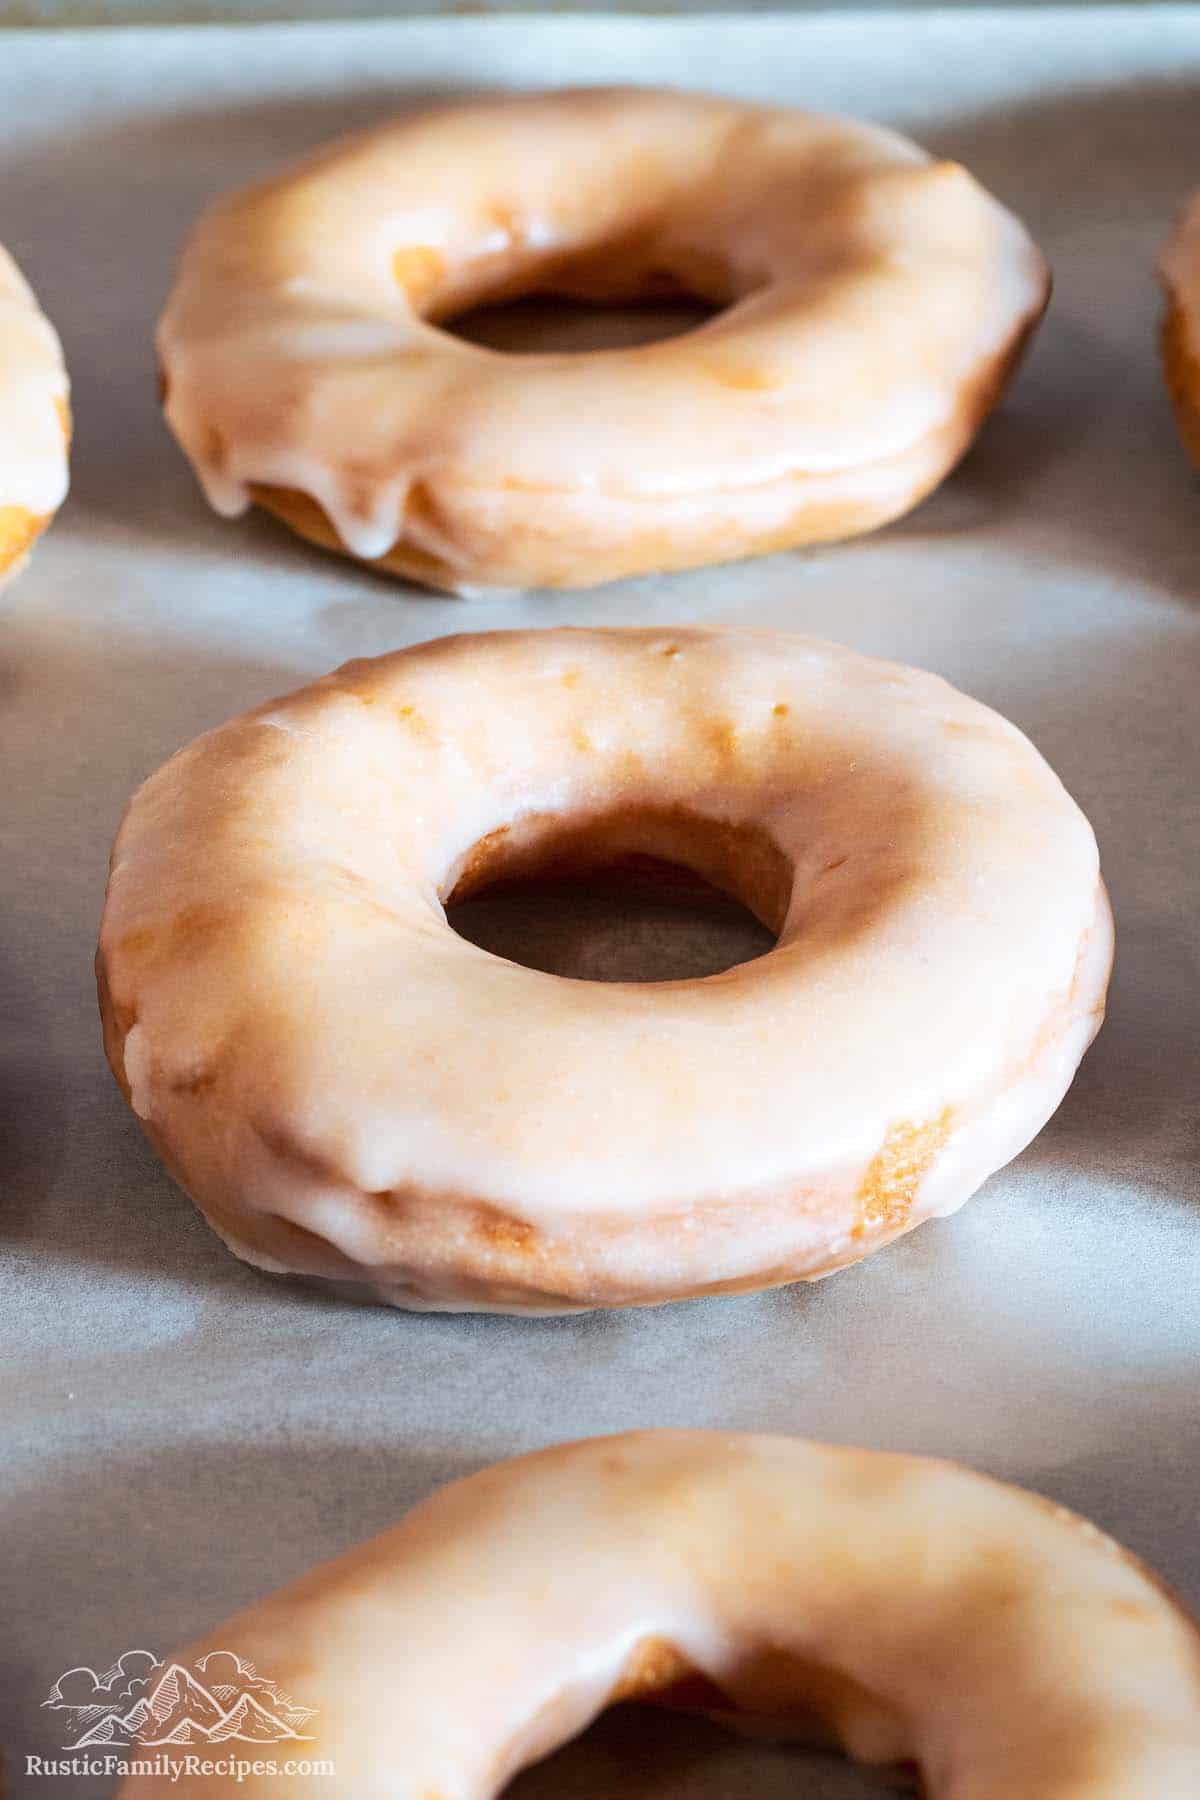 Three glazed donuts on parchment lined baking sheet